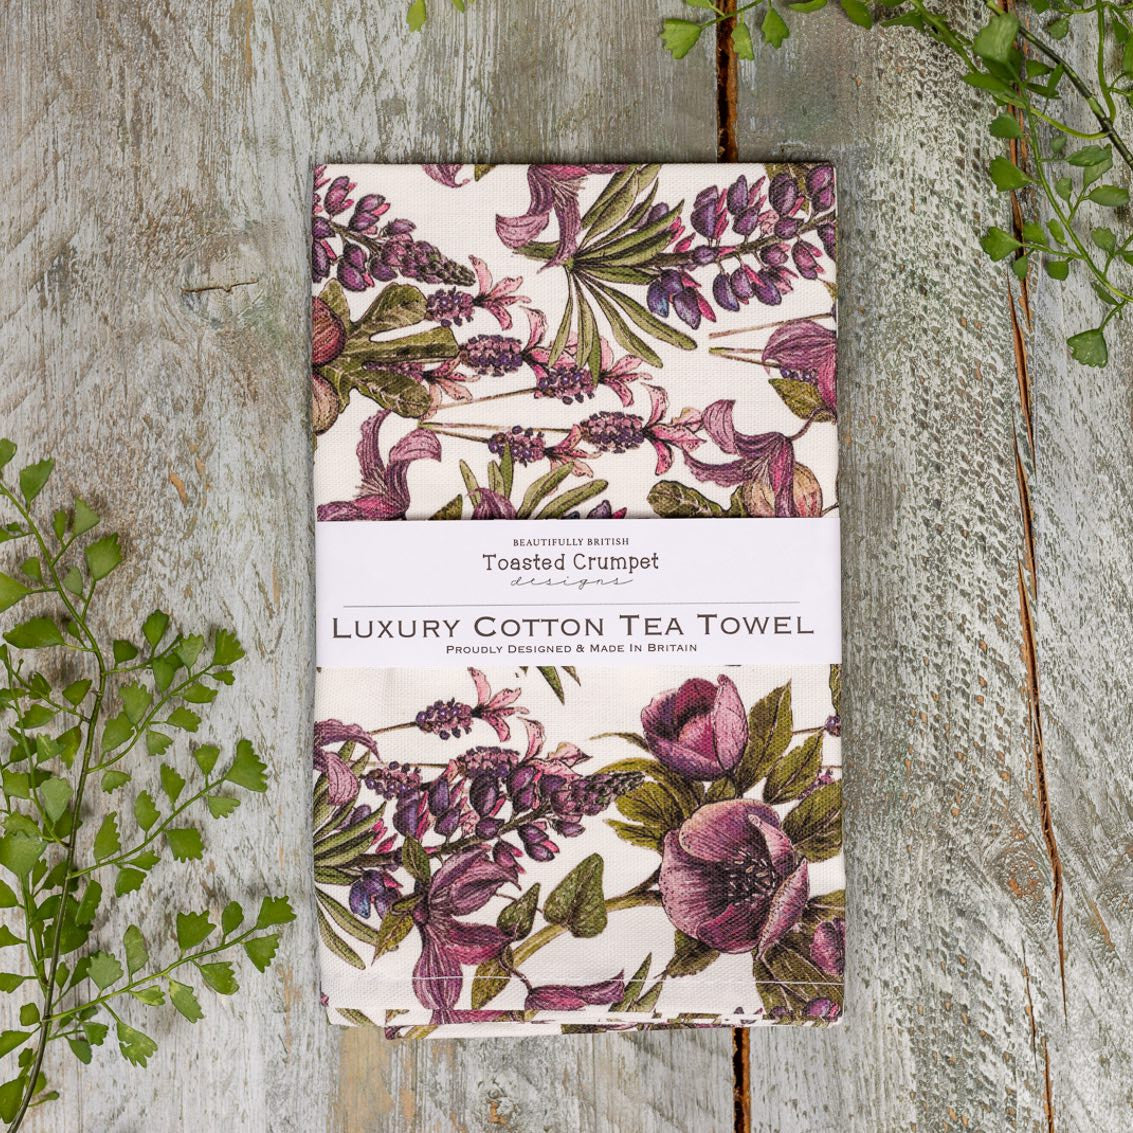 Mulberry Pure Tea Towel by Toasted Crumpet.